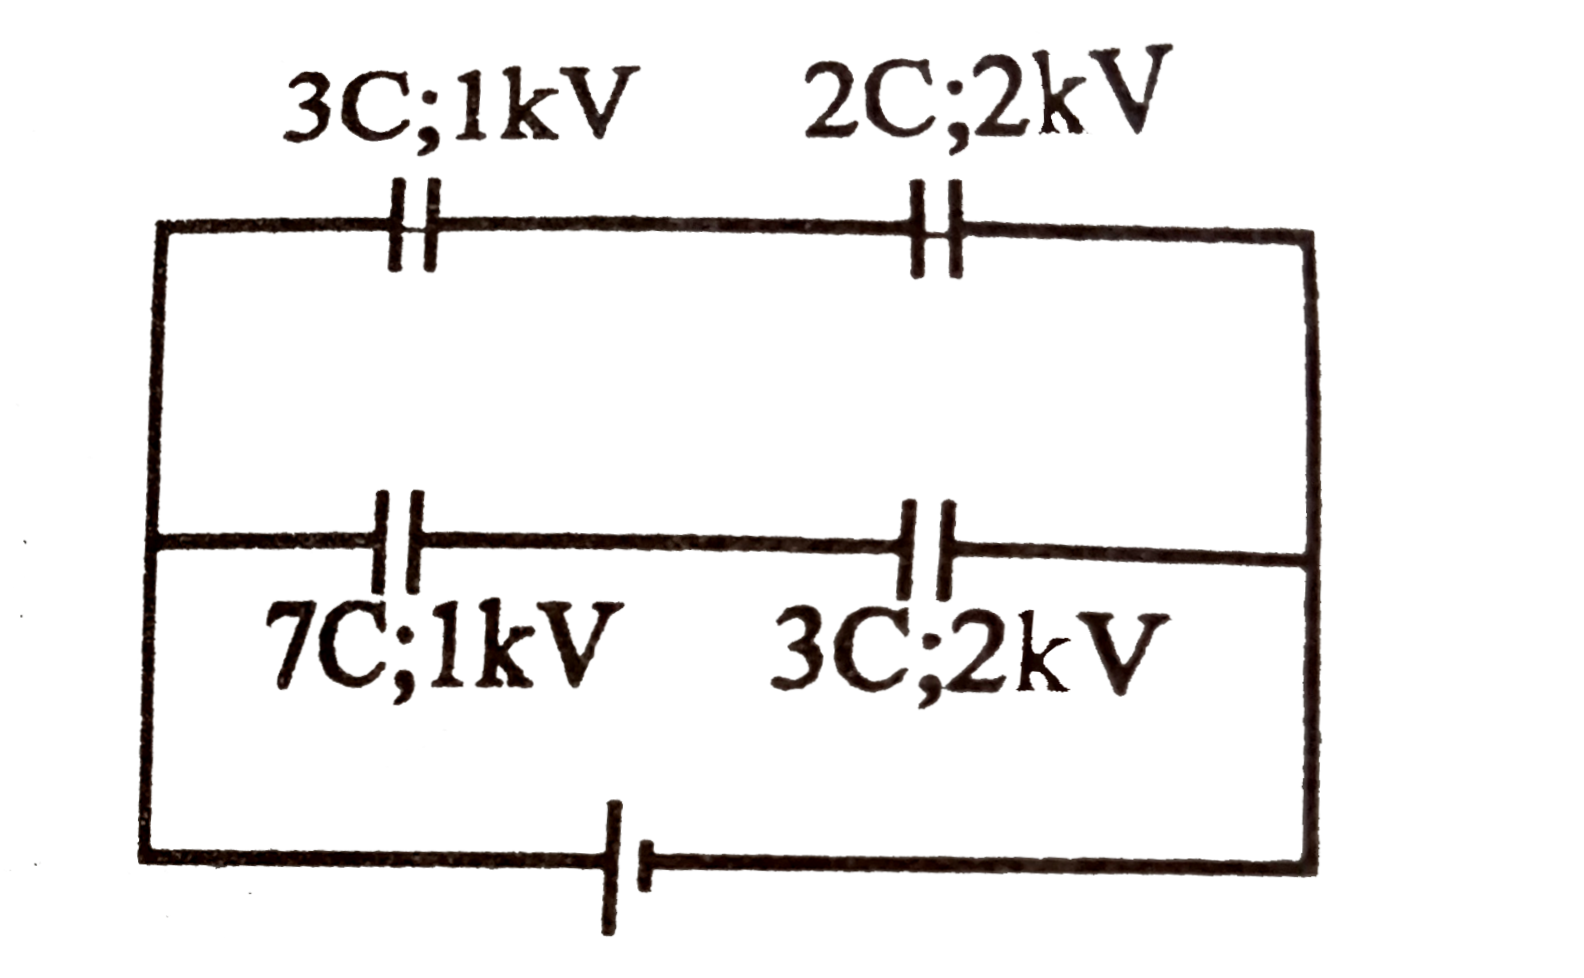 The diagram shown four capacitors with capacitances and break down voltages as mentioned. What should be the maximum value of the external emf source such that no capacitor breaks down? [Hint: First of all find out the break down voltages of each branch. After that compare tham.]